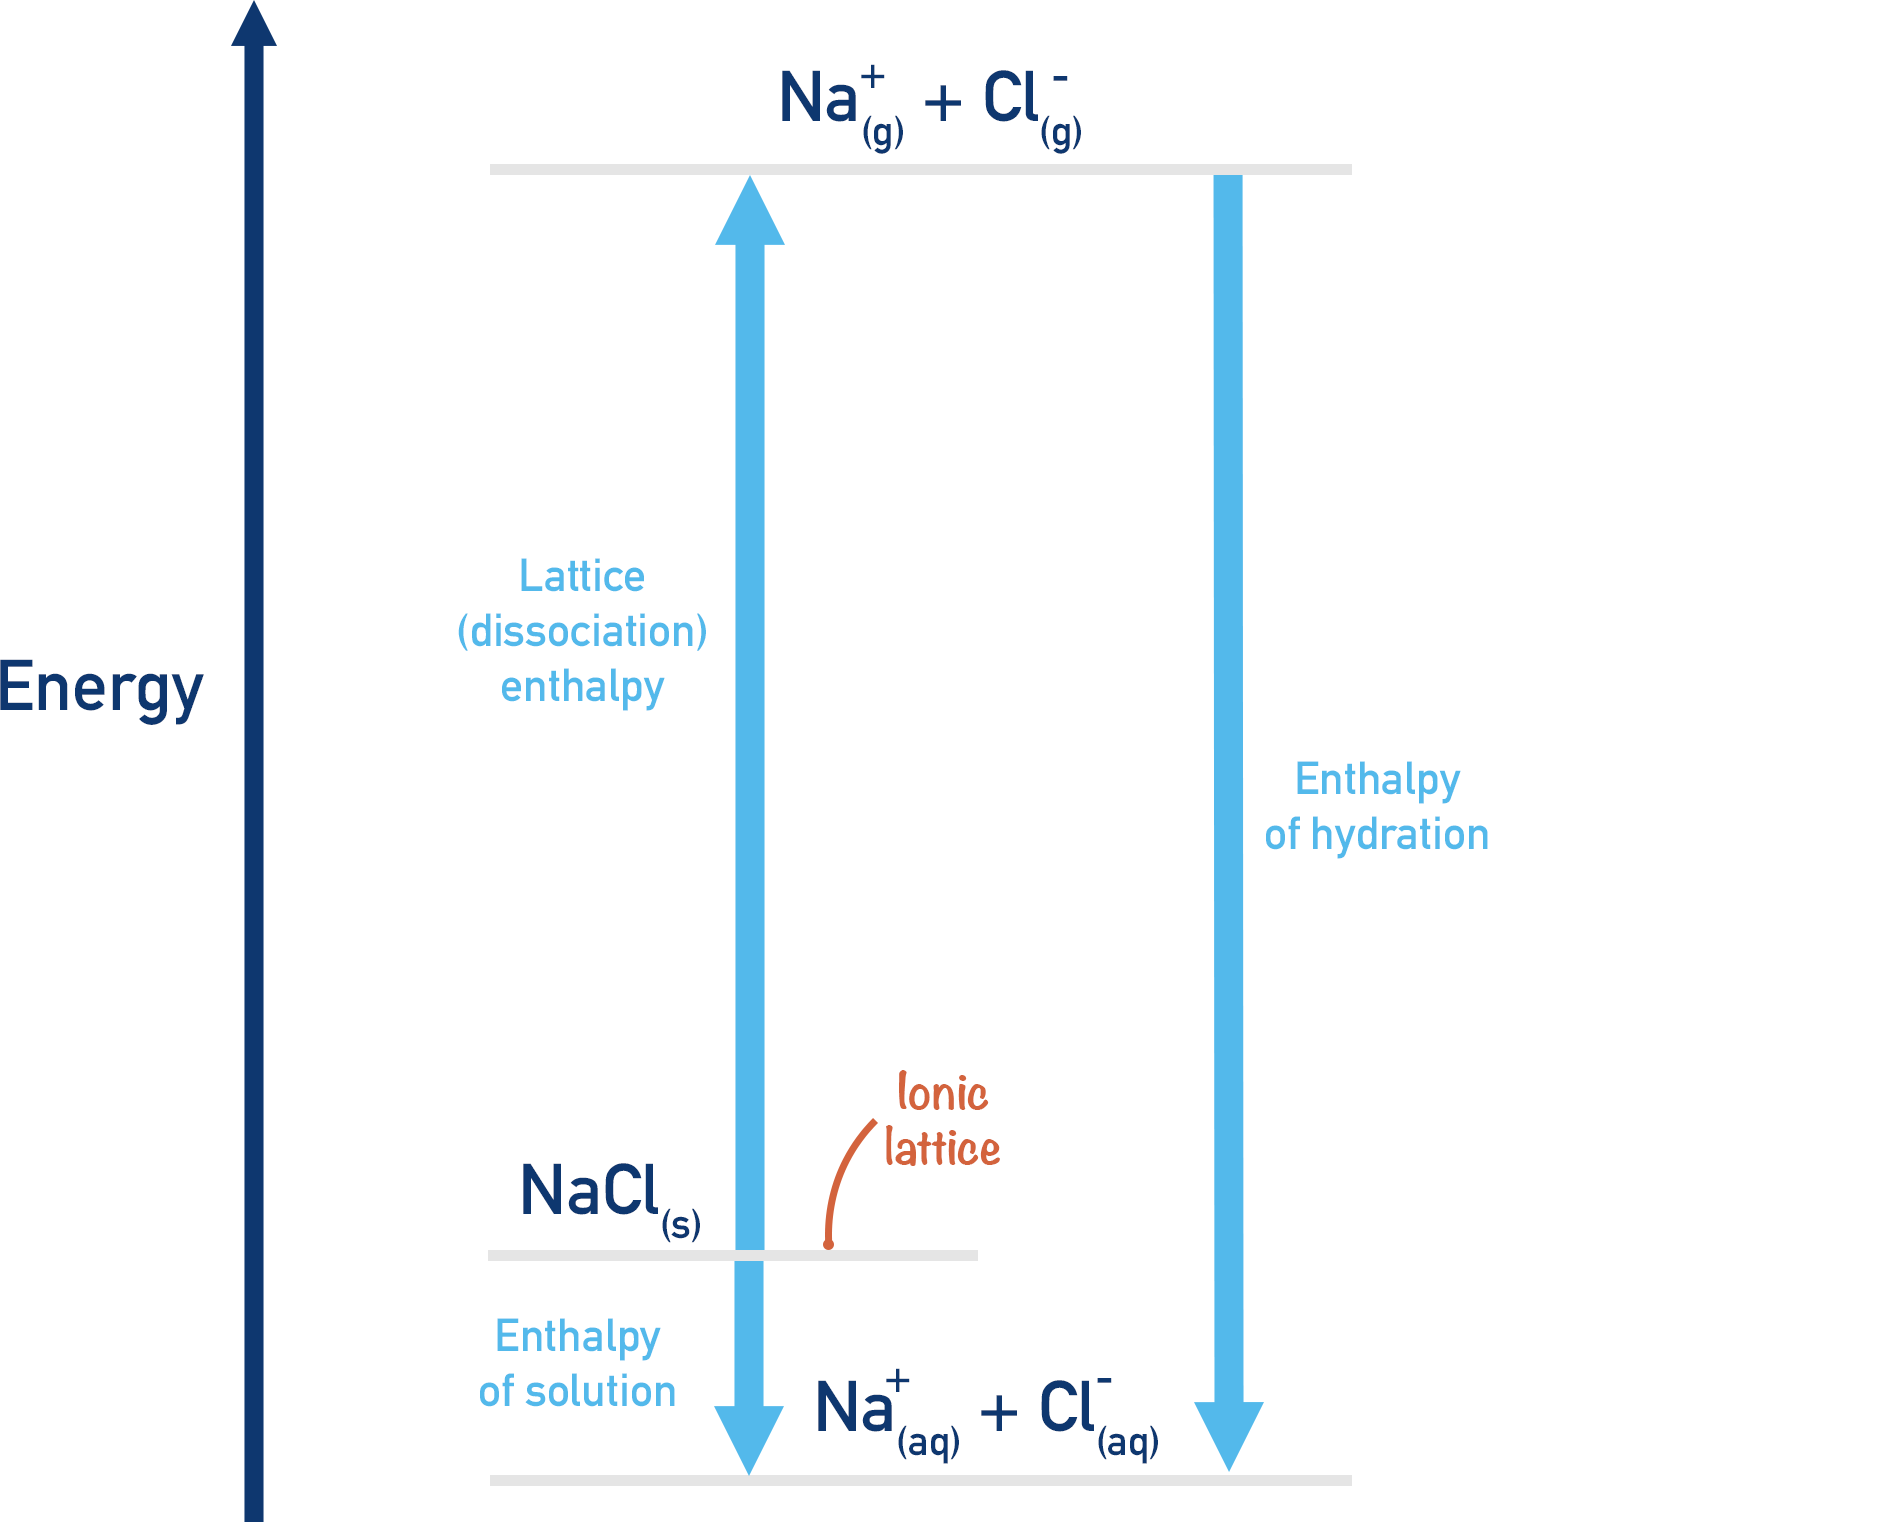 born-harber cycle for enthalpy of hydration of sodium chloride